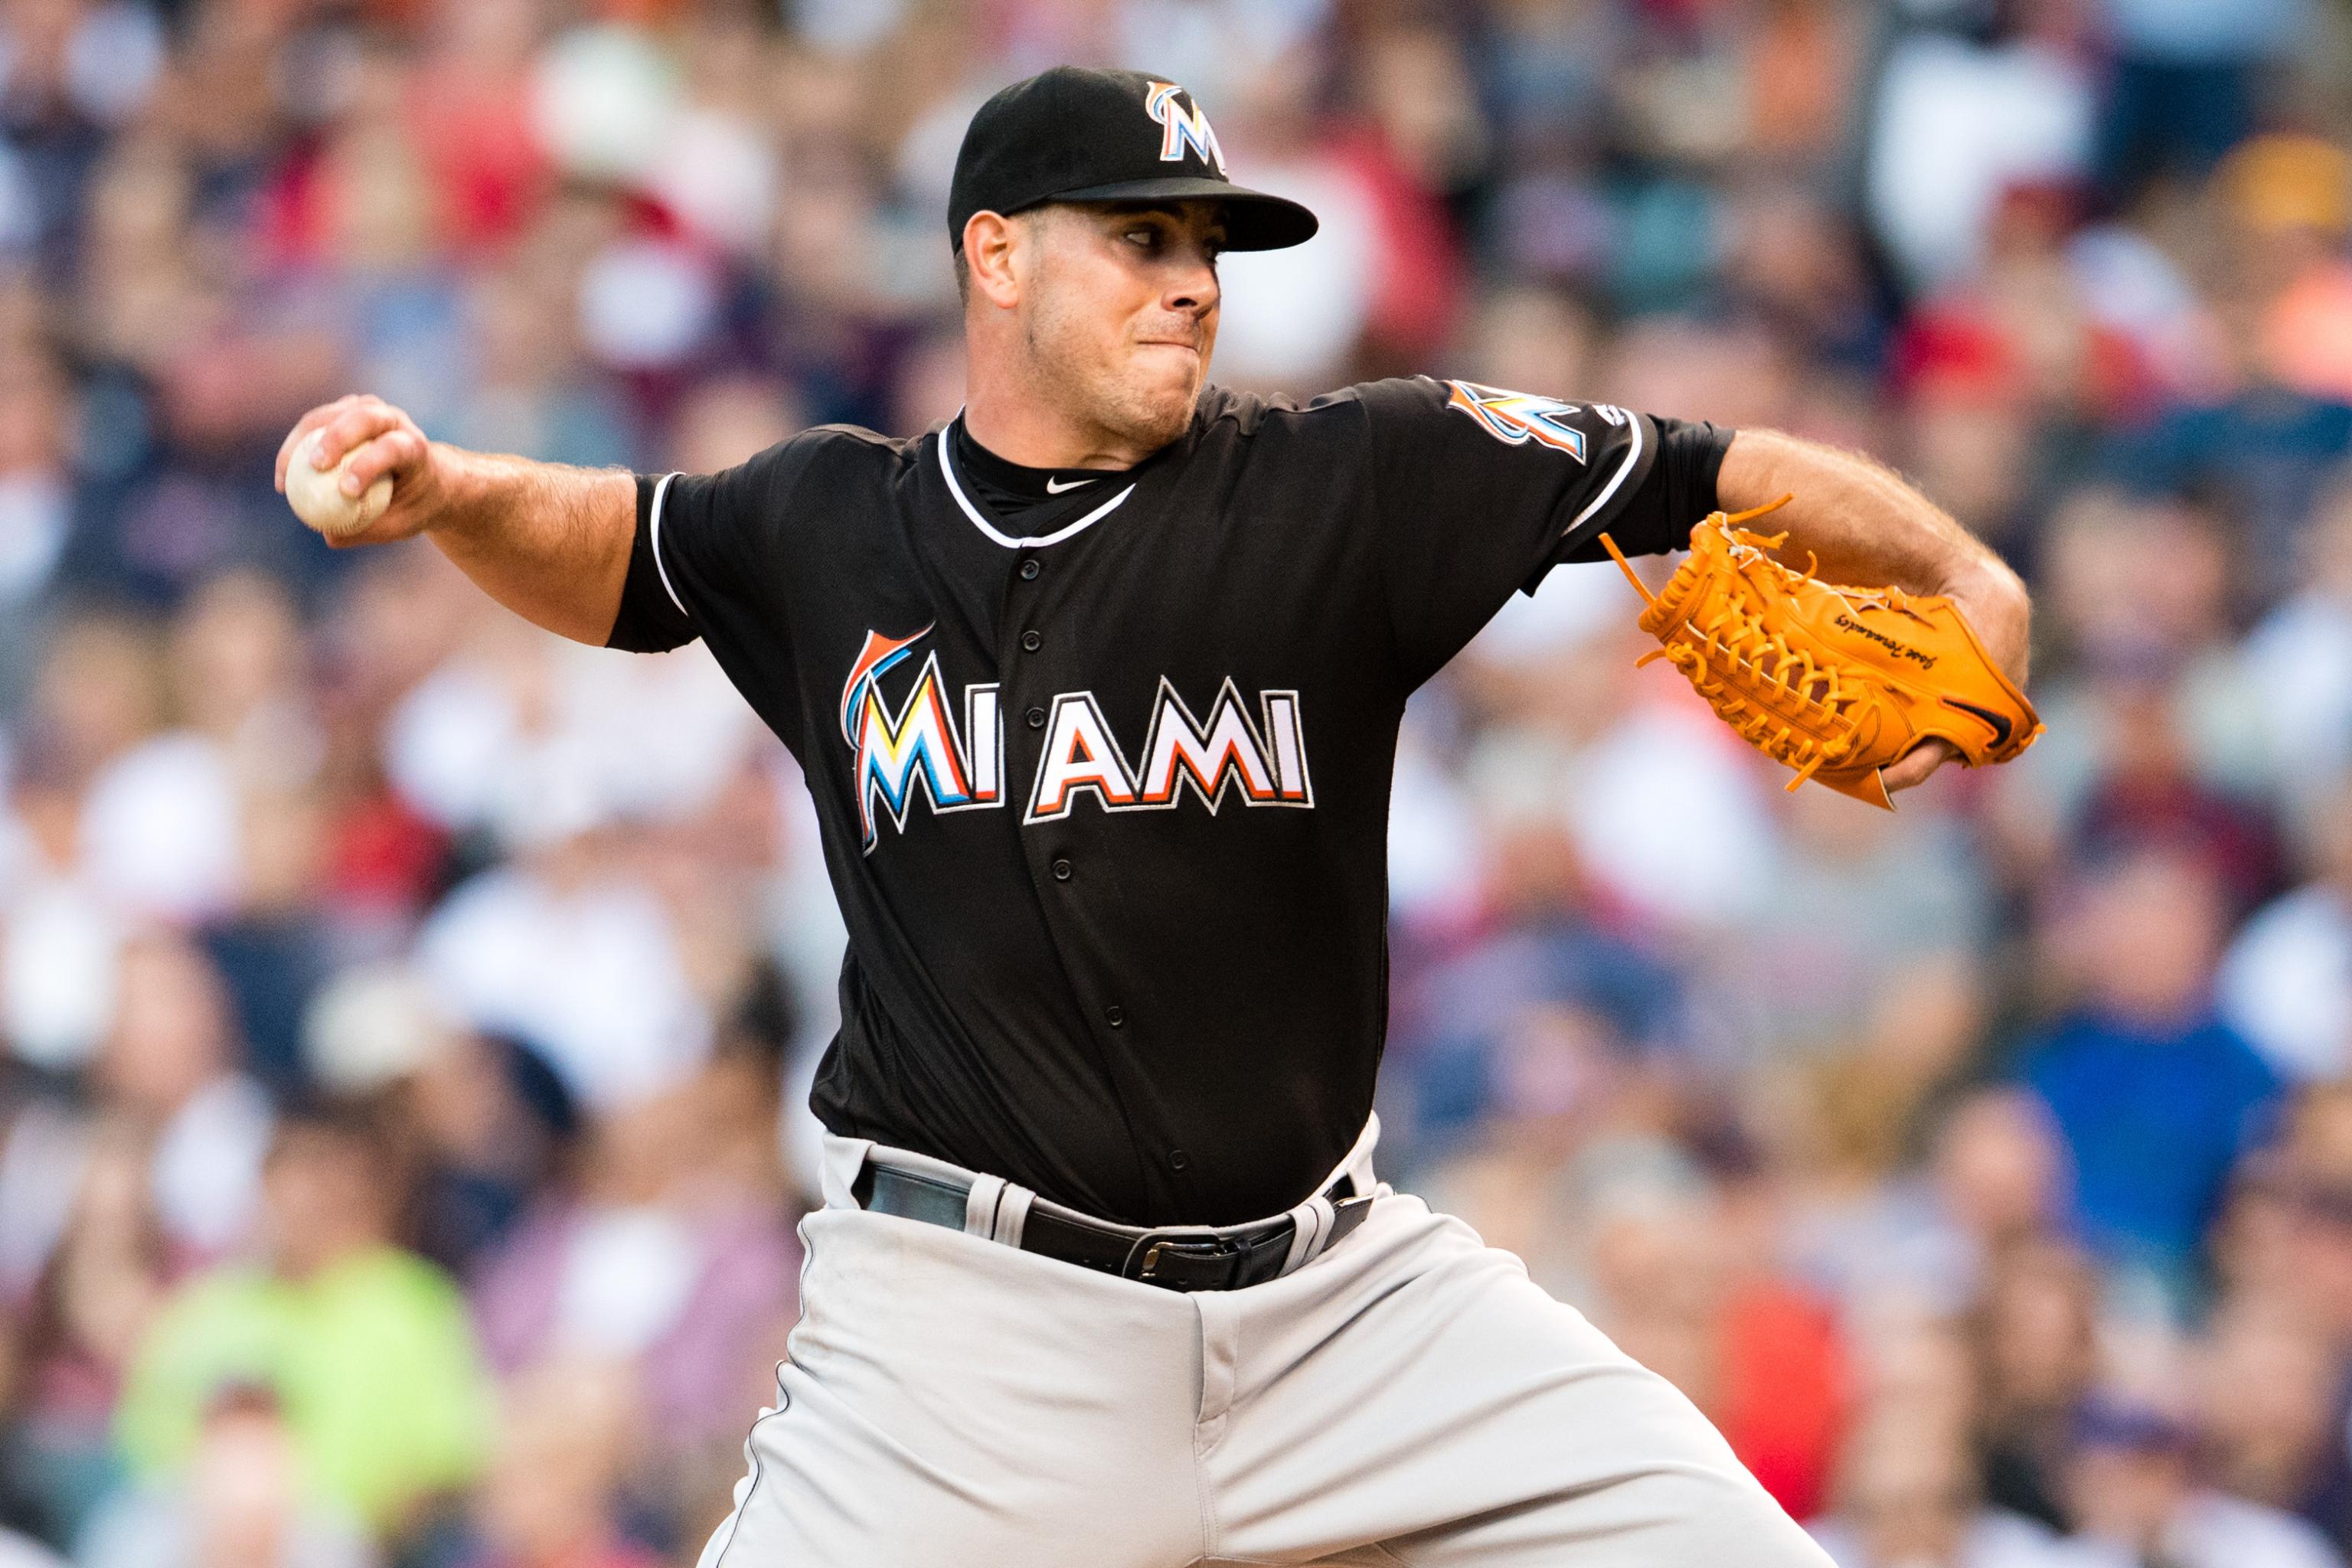 Jose Fernandez wanted to pitch for the Tampa Bay Rays - DRaysBay